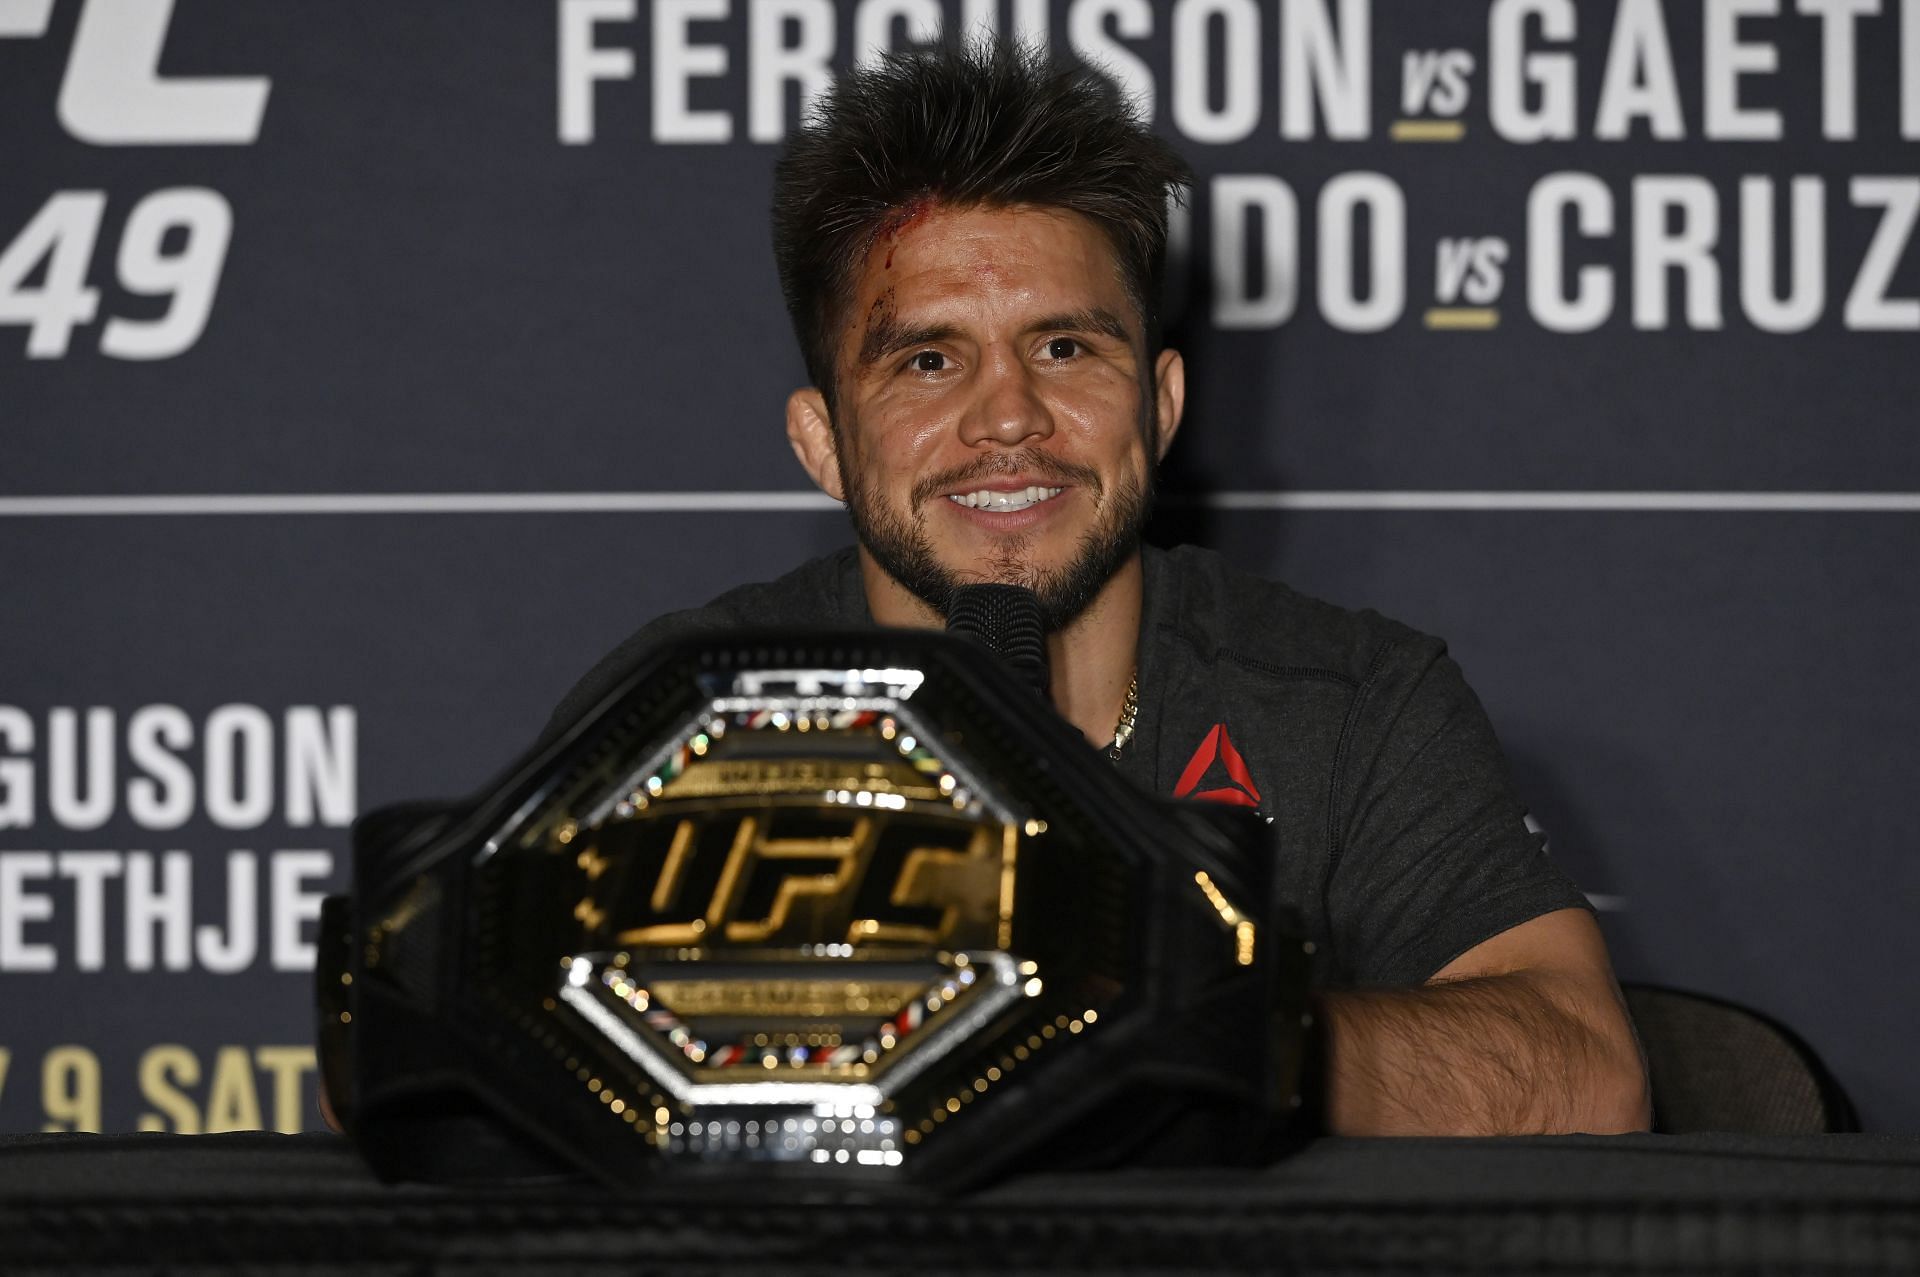 Henry Cejudo walked away from the octagon before losing either of his titles